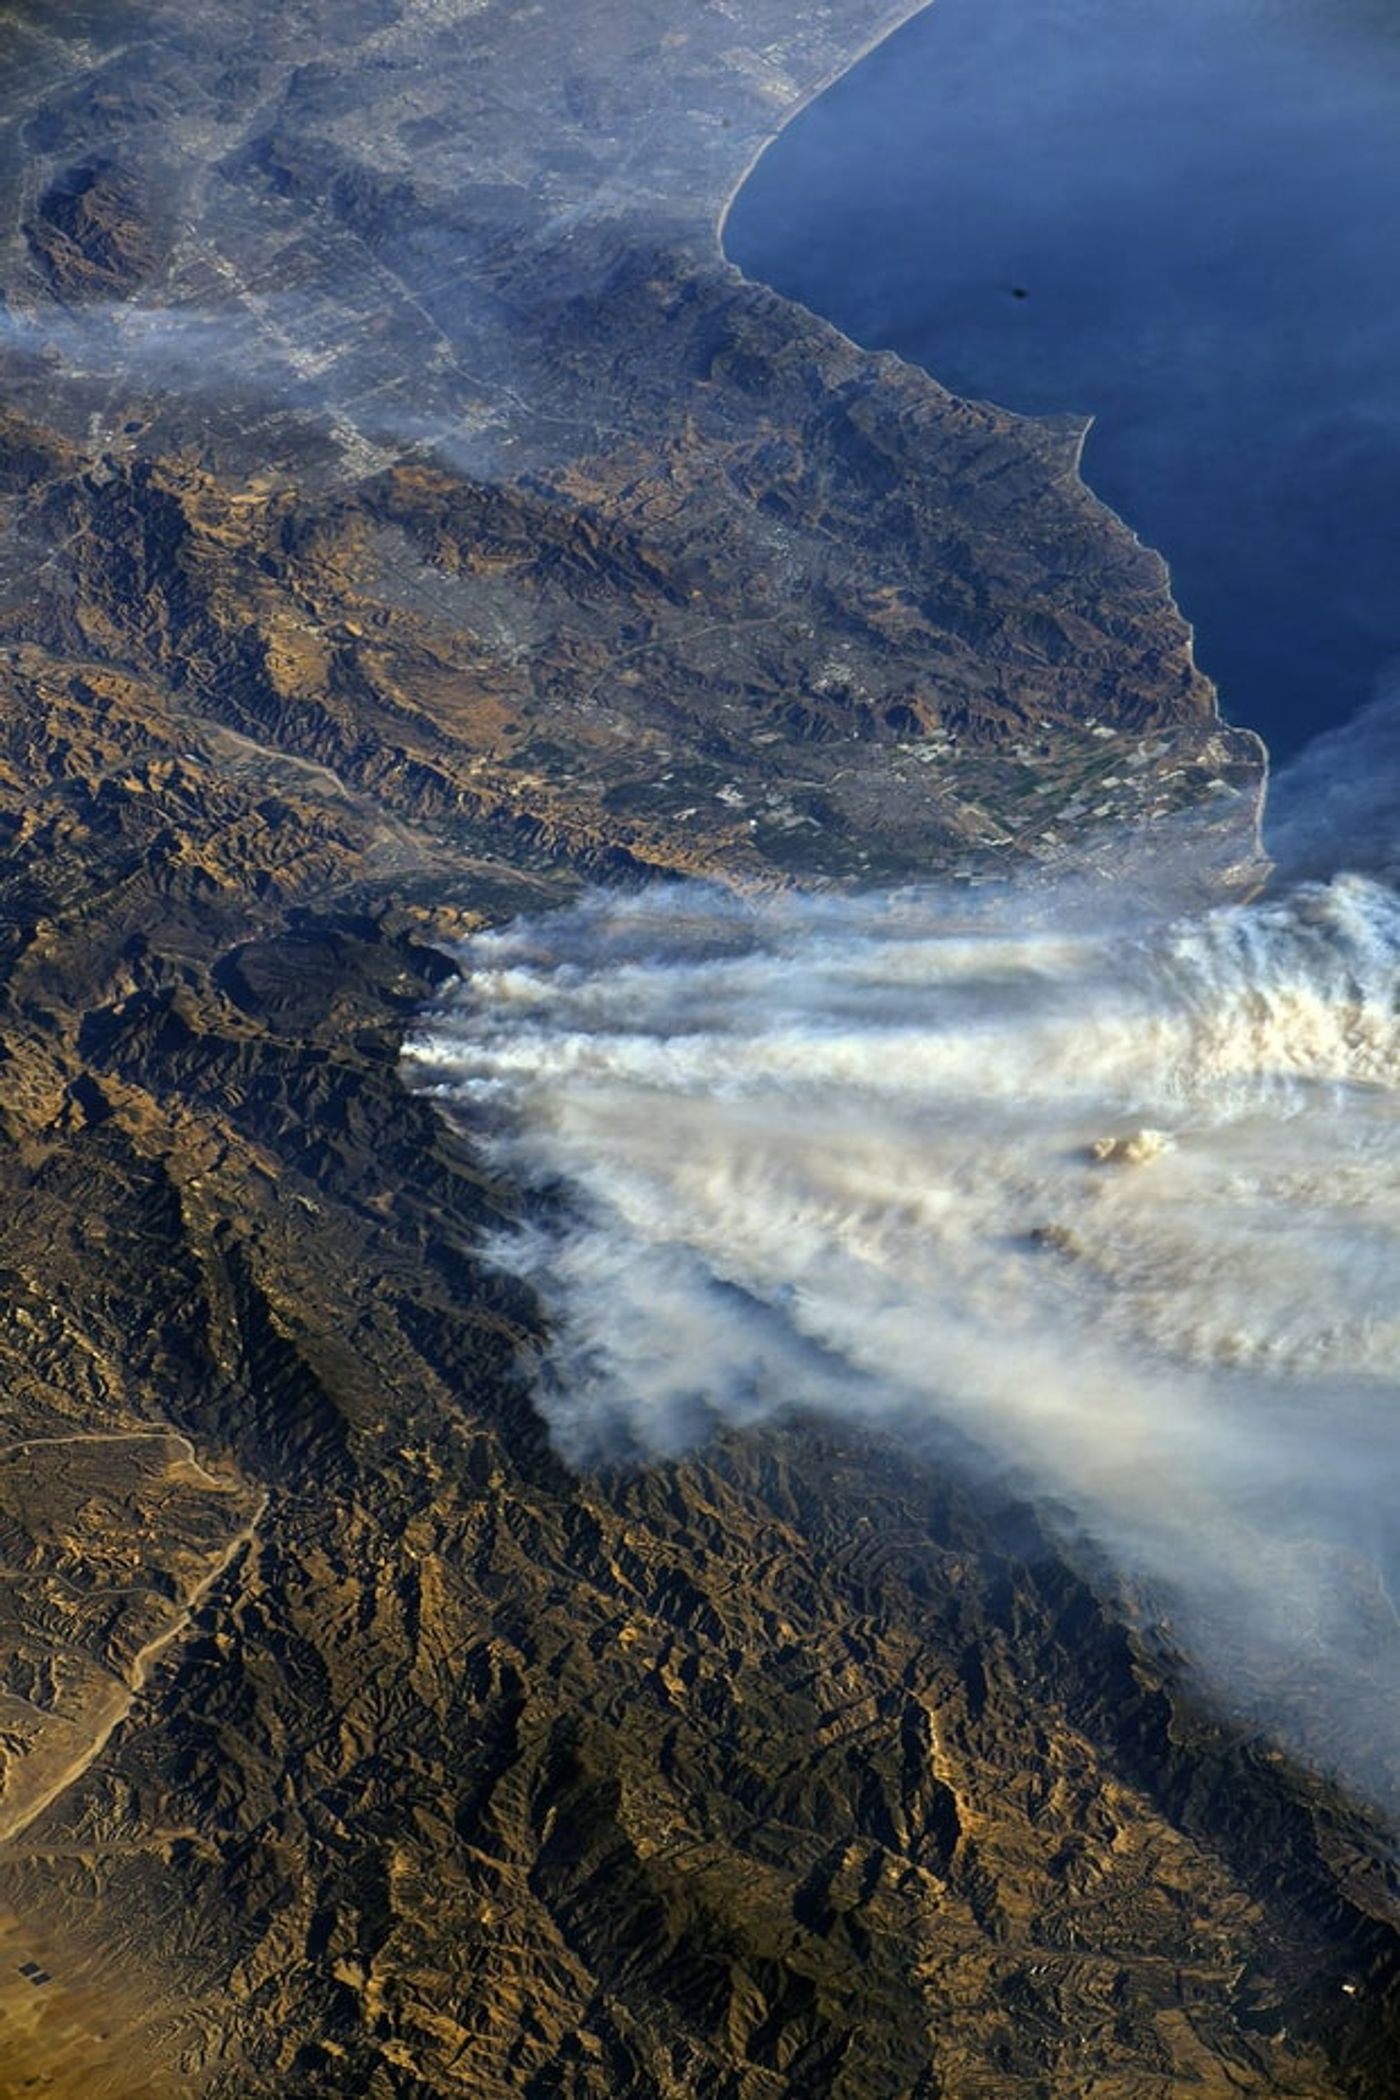 The southern California wildfires could be seen by the International Space Station crew from their vantage point in low Earth orbit. Randy Bresnik/NASA